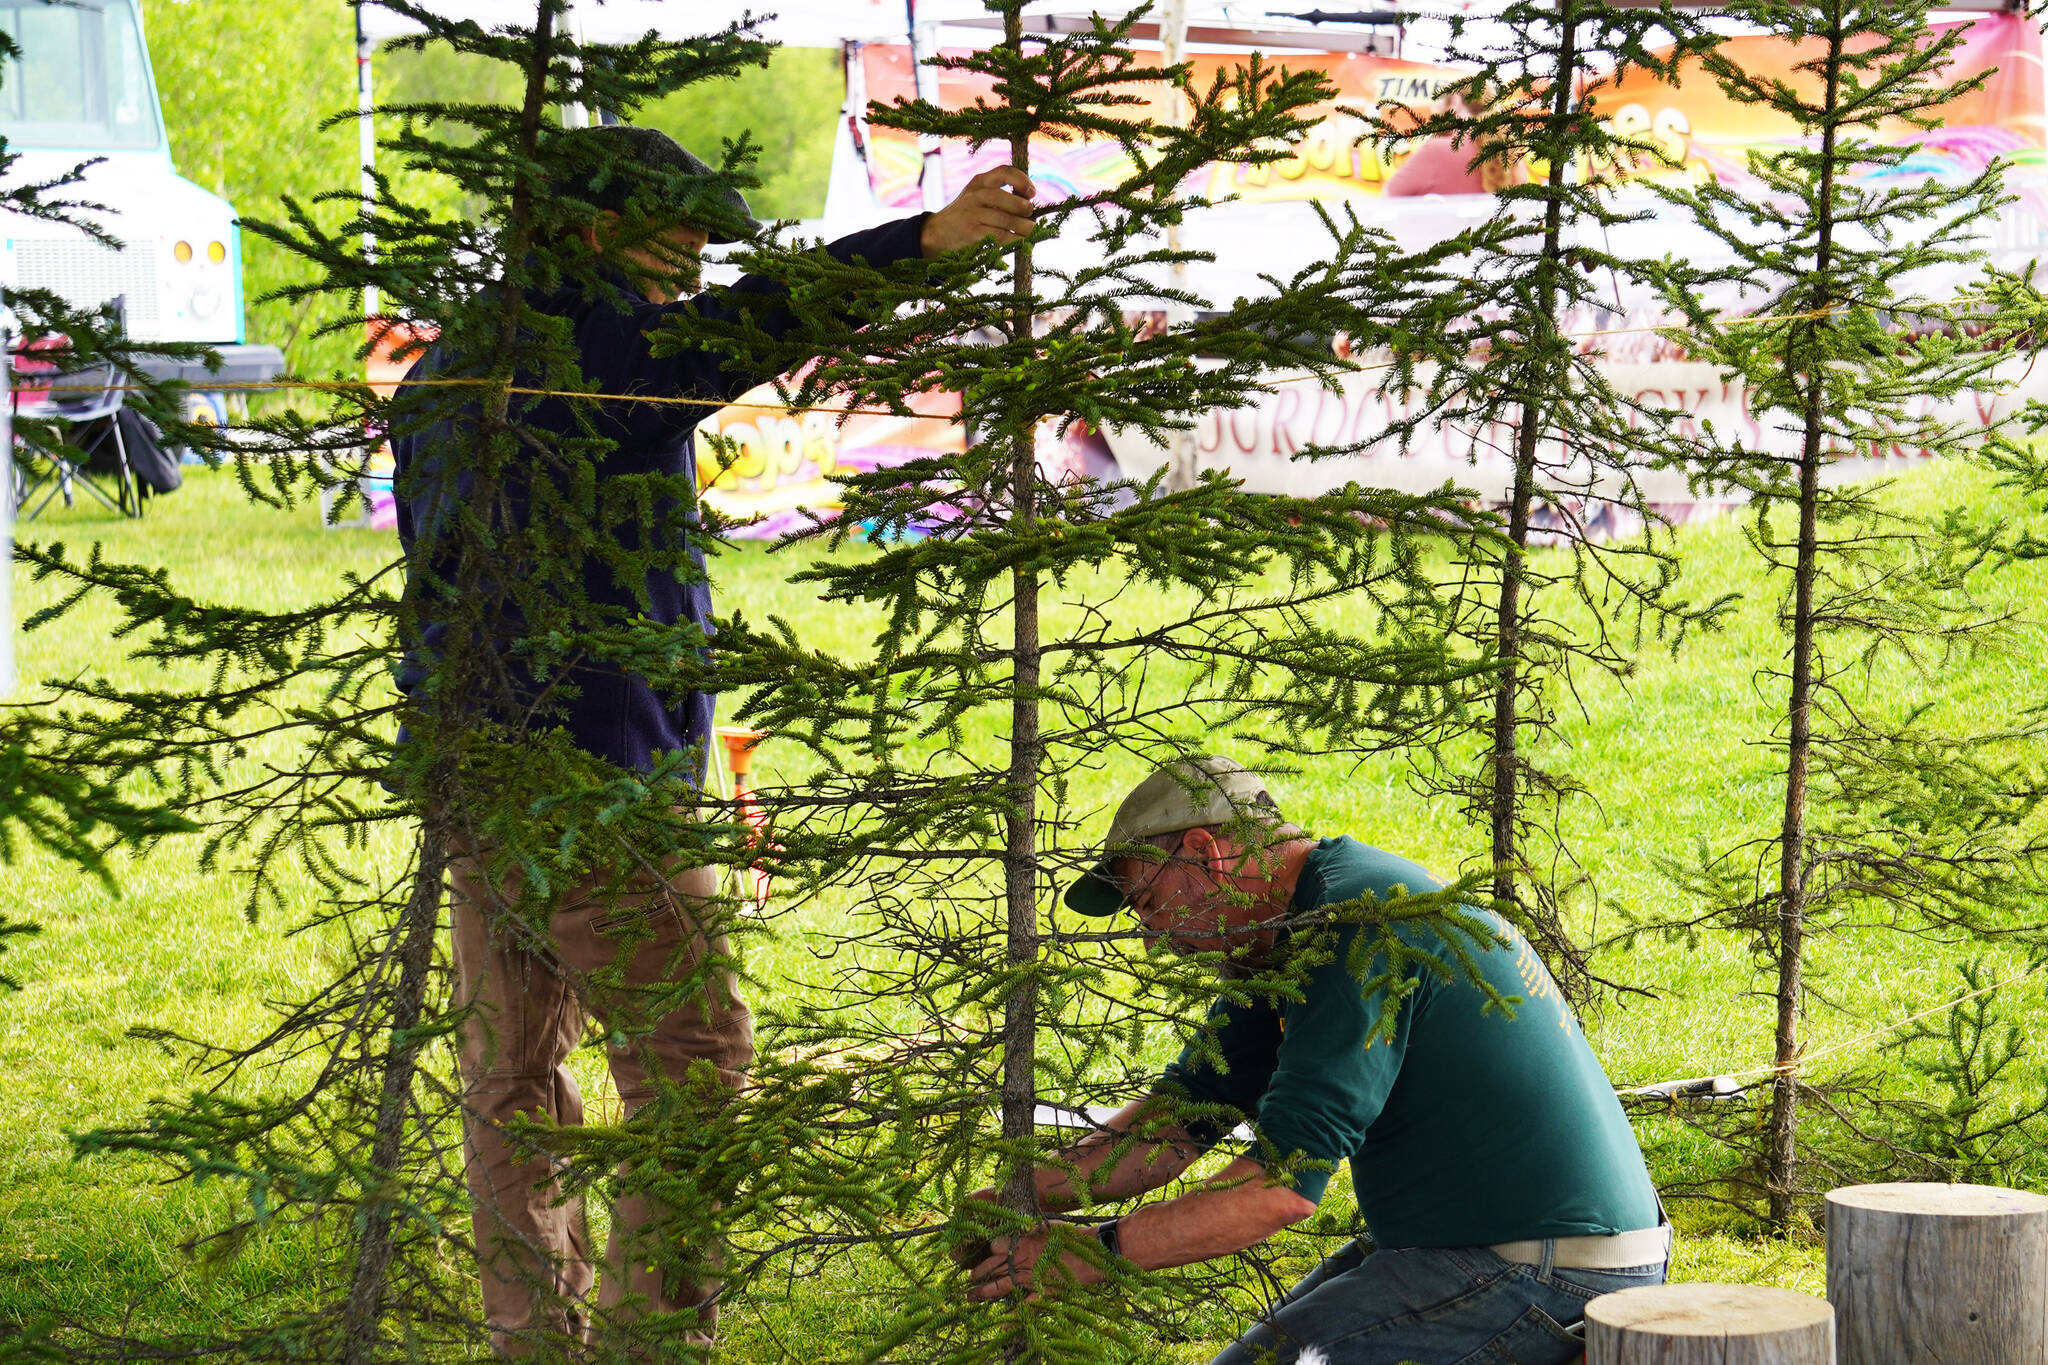 Mitch Michaud, right, tends to a spruce tree during the Kenai River Festival on Friday, June 9, 2023, at Soldotna Creek Park in Soldotna, Alaska. (Jake Dye/Peninsula Clarion)